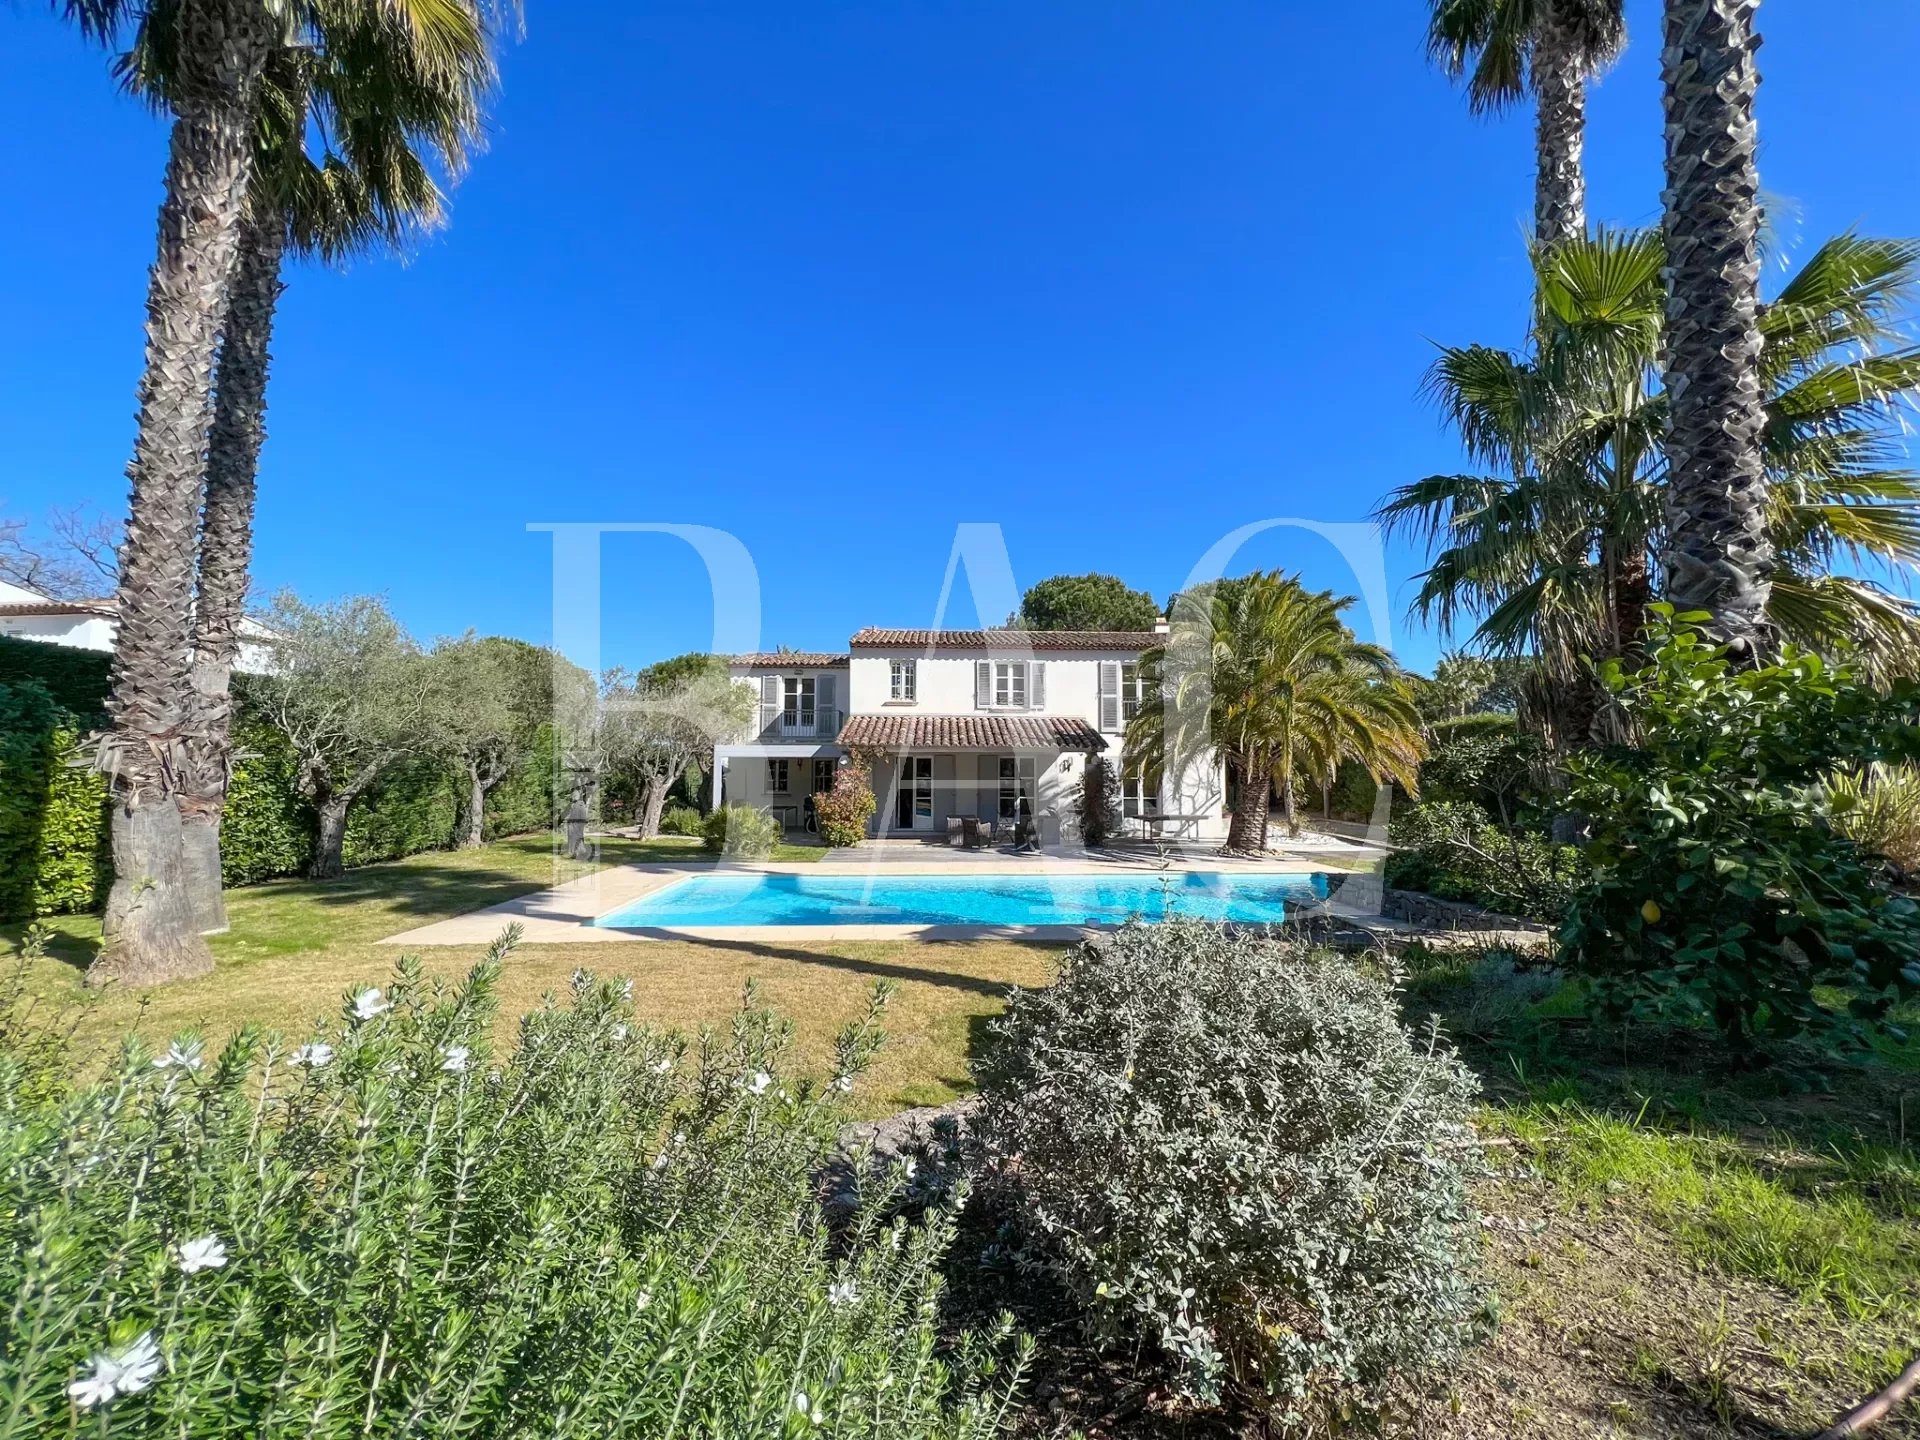 Gassin - Magnificent villa in the heart of a closed domain at the gates of Saint-Tropez.